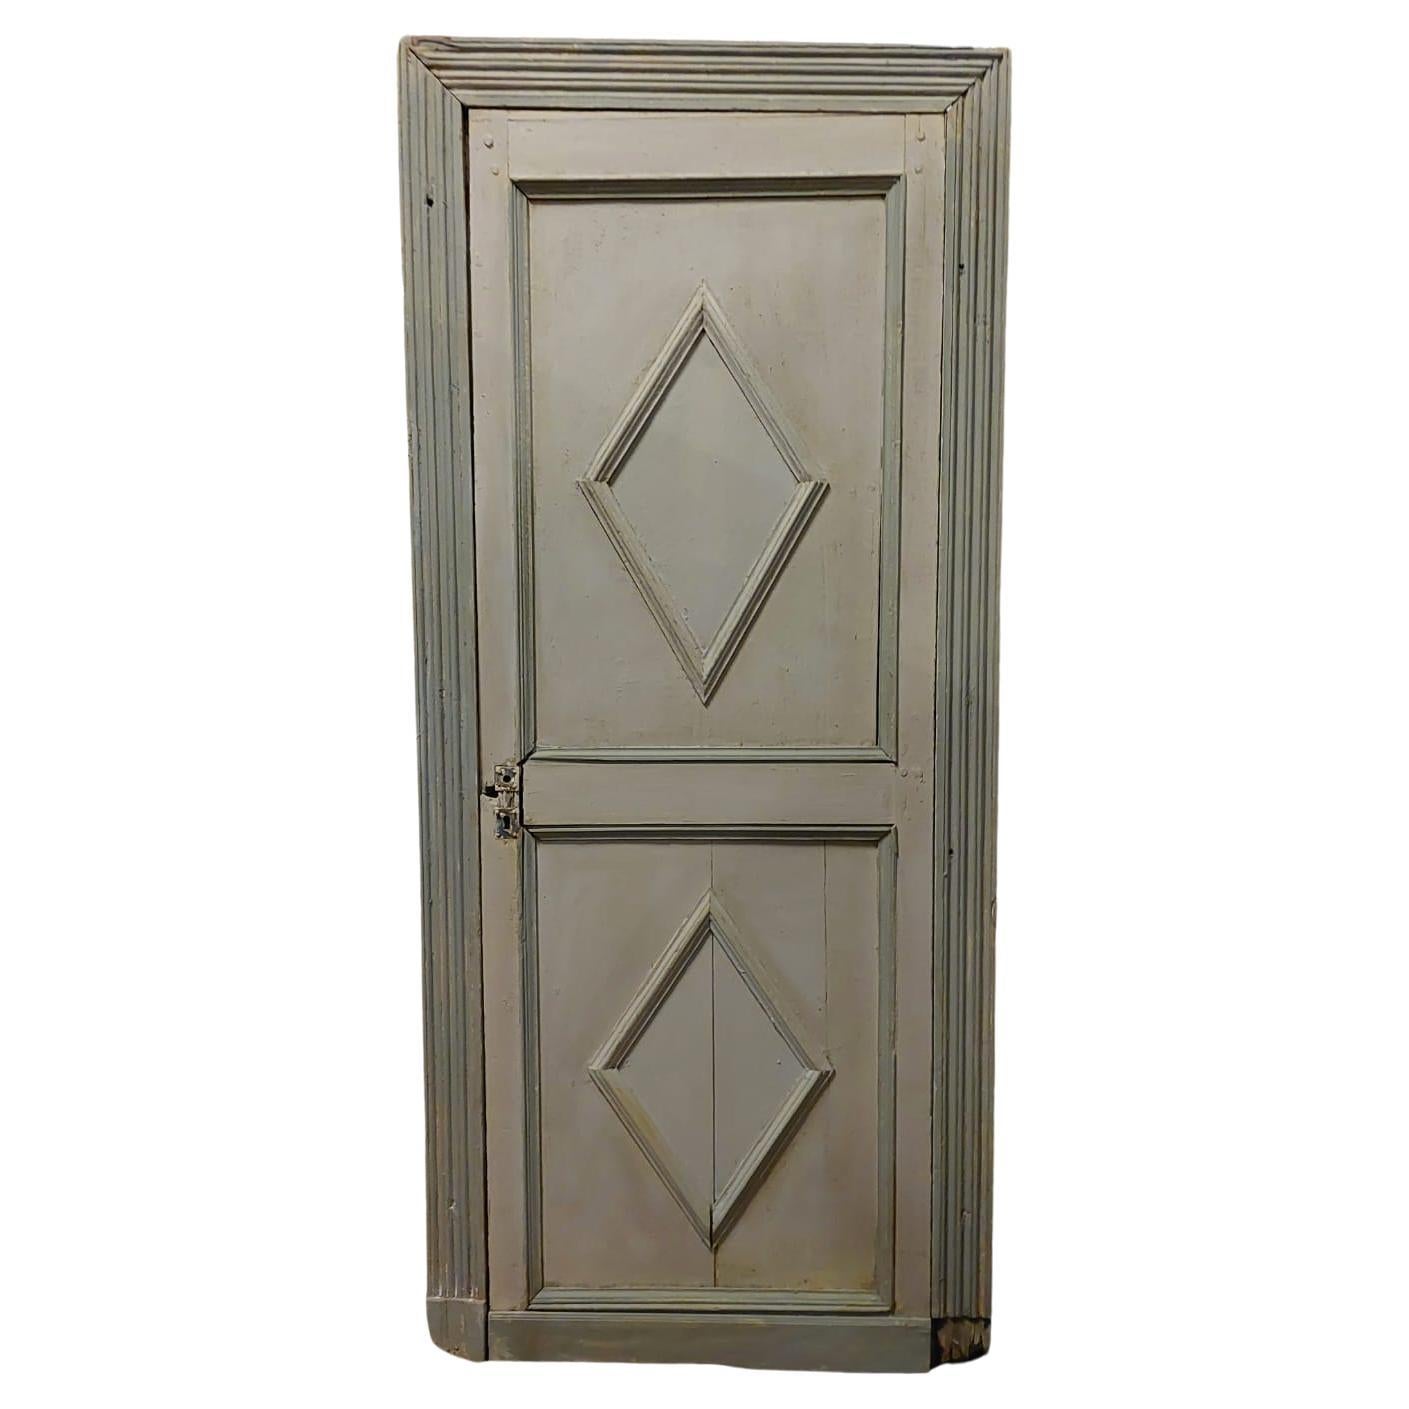 Ancient Lacquered Door with Frame, Early 1800s, from Italy